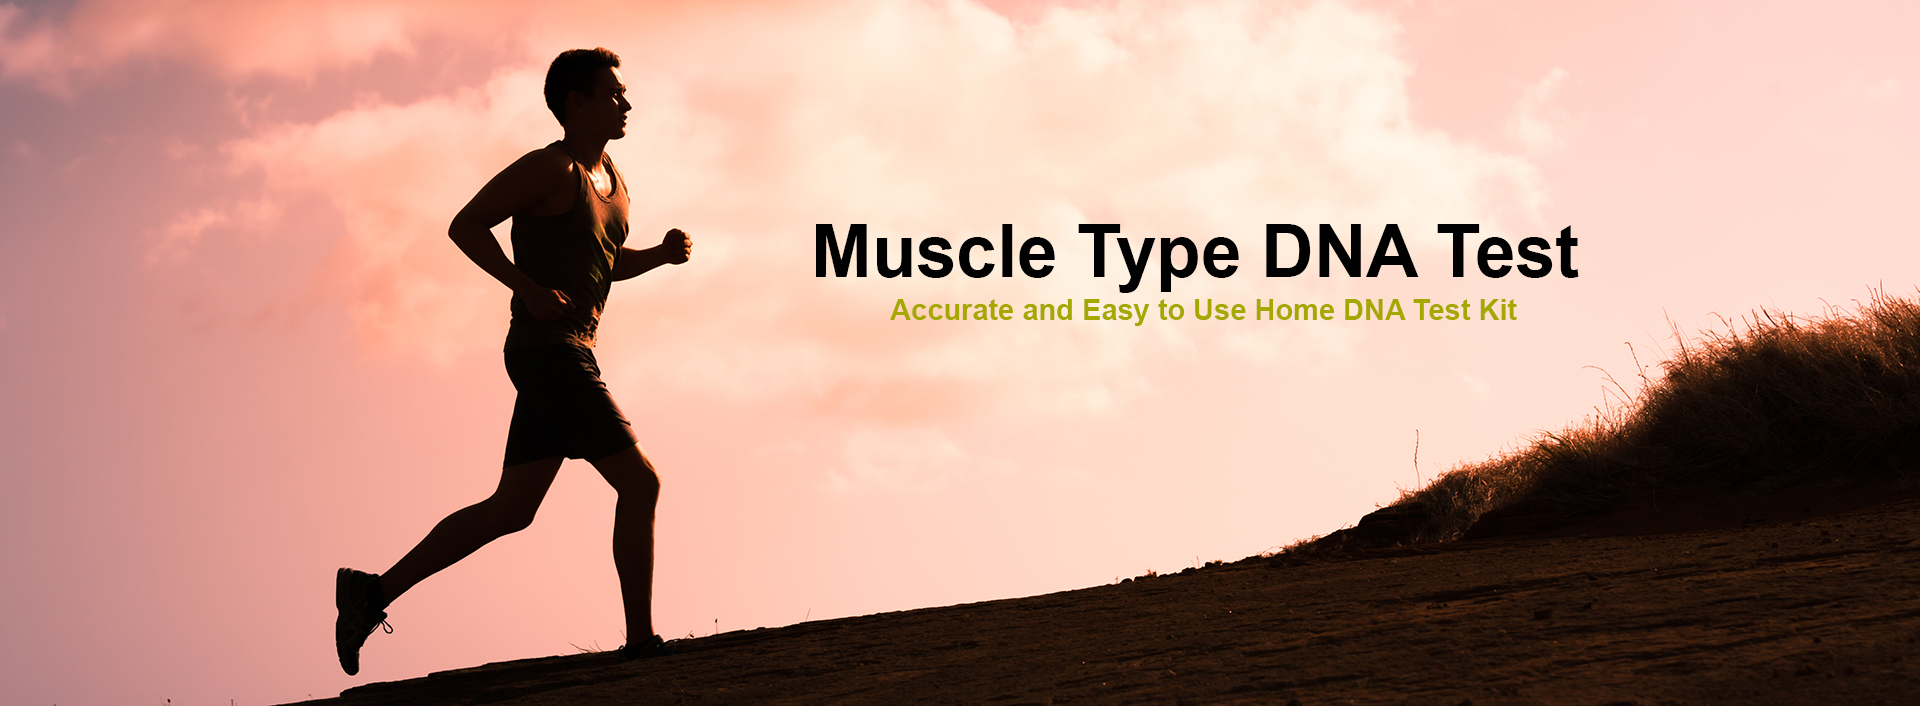 Muscle Type DNA Test